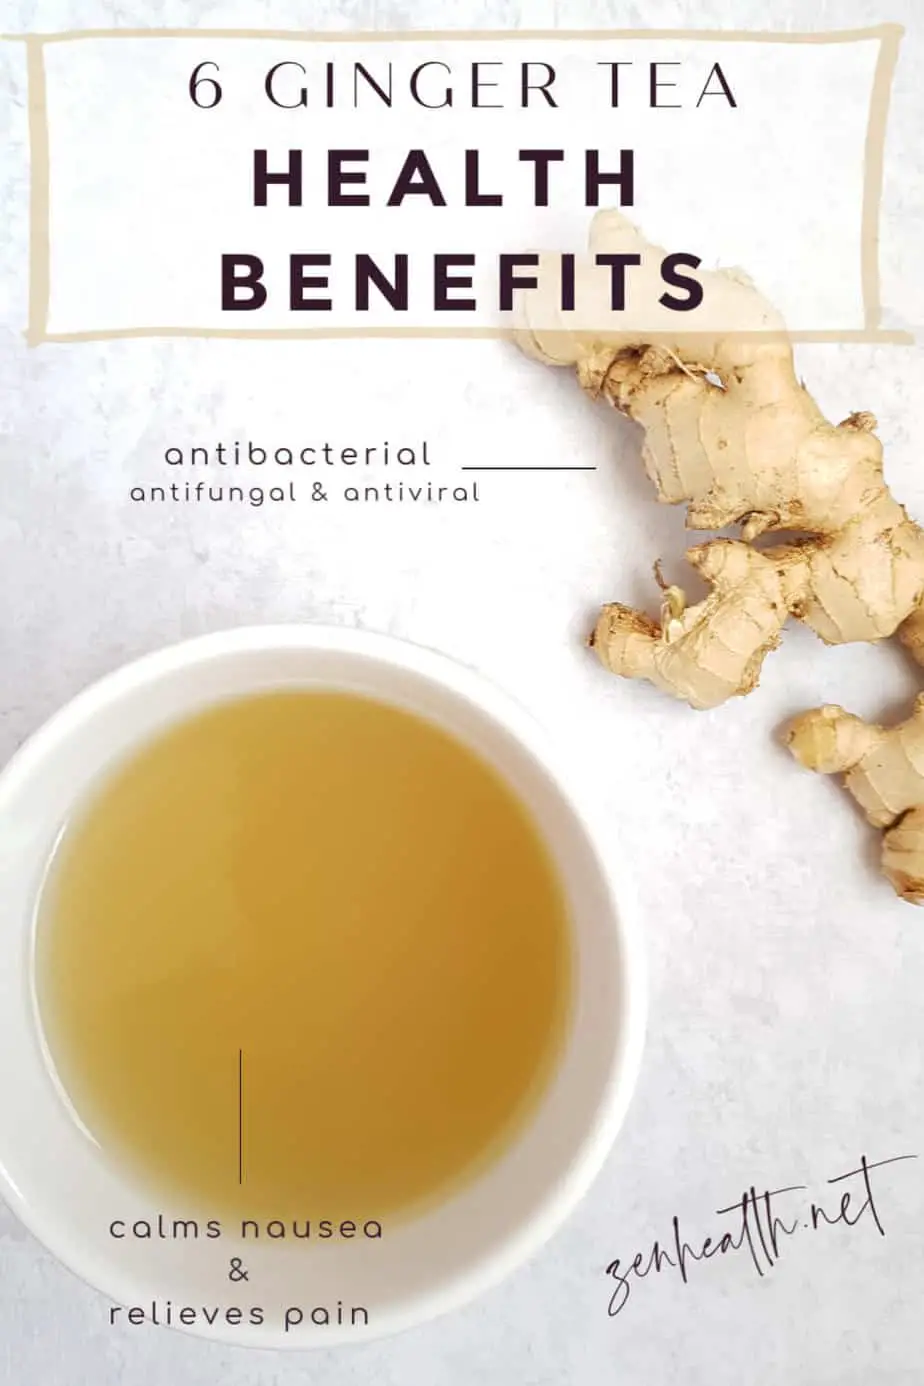 6 Ginger Tea Health Benefits that are proven #gingertea #gingerteabenefits #gingerbenefits #benefitsofginger